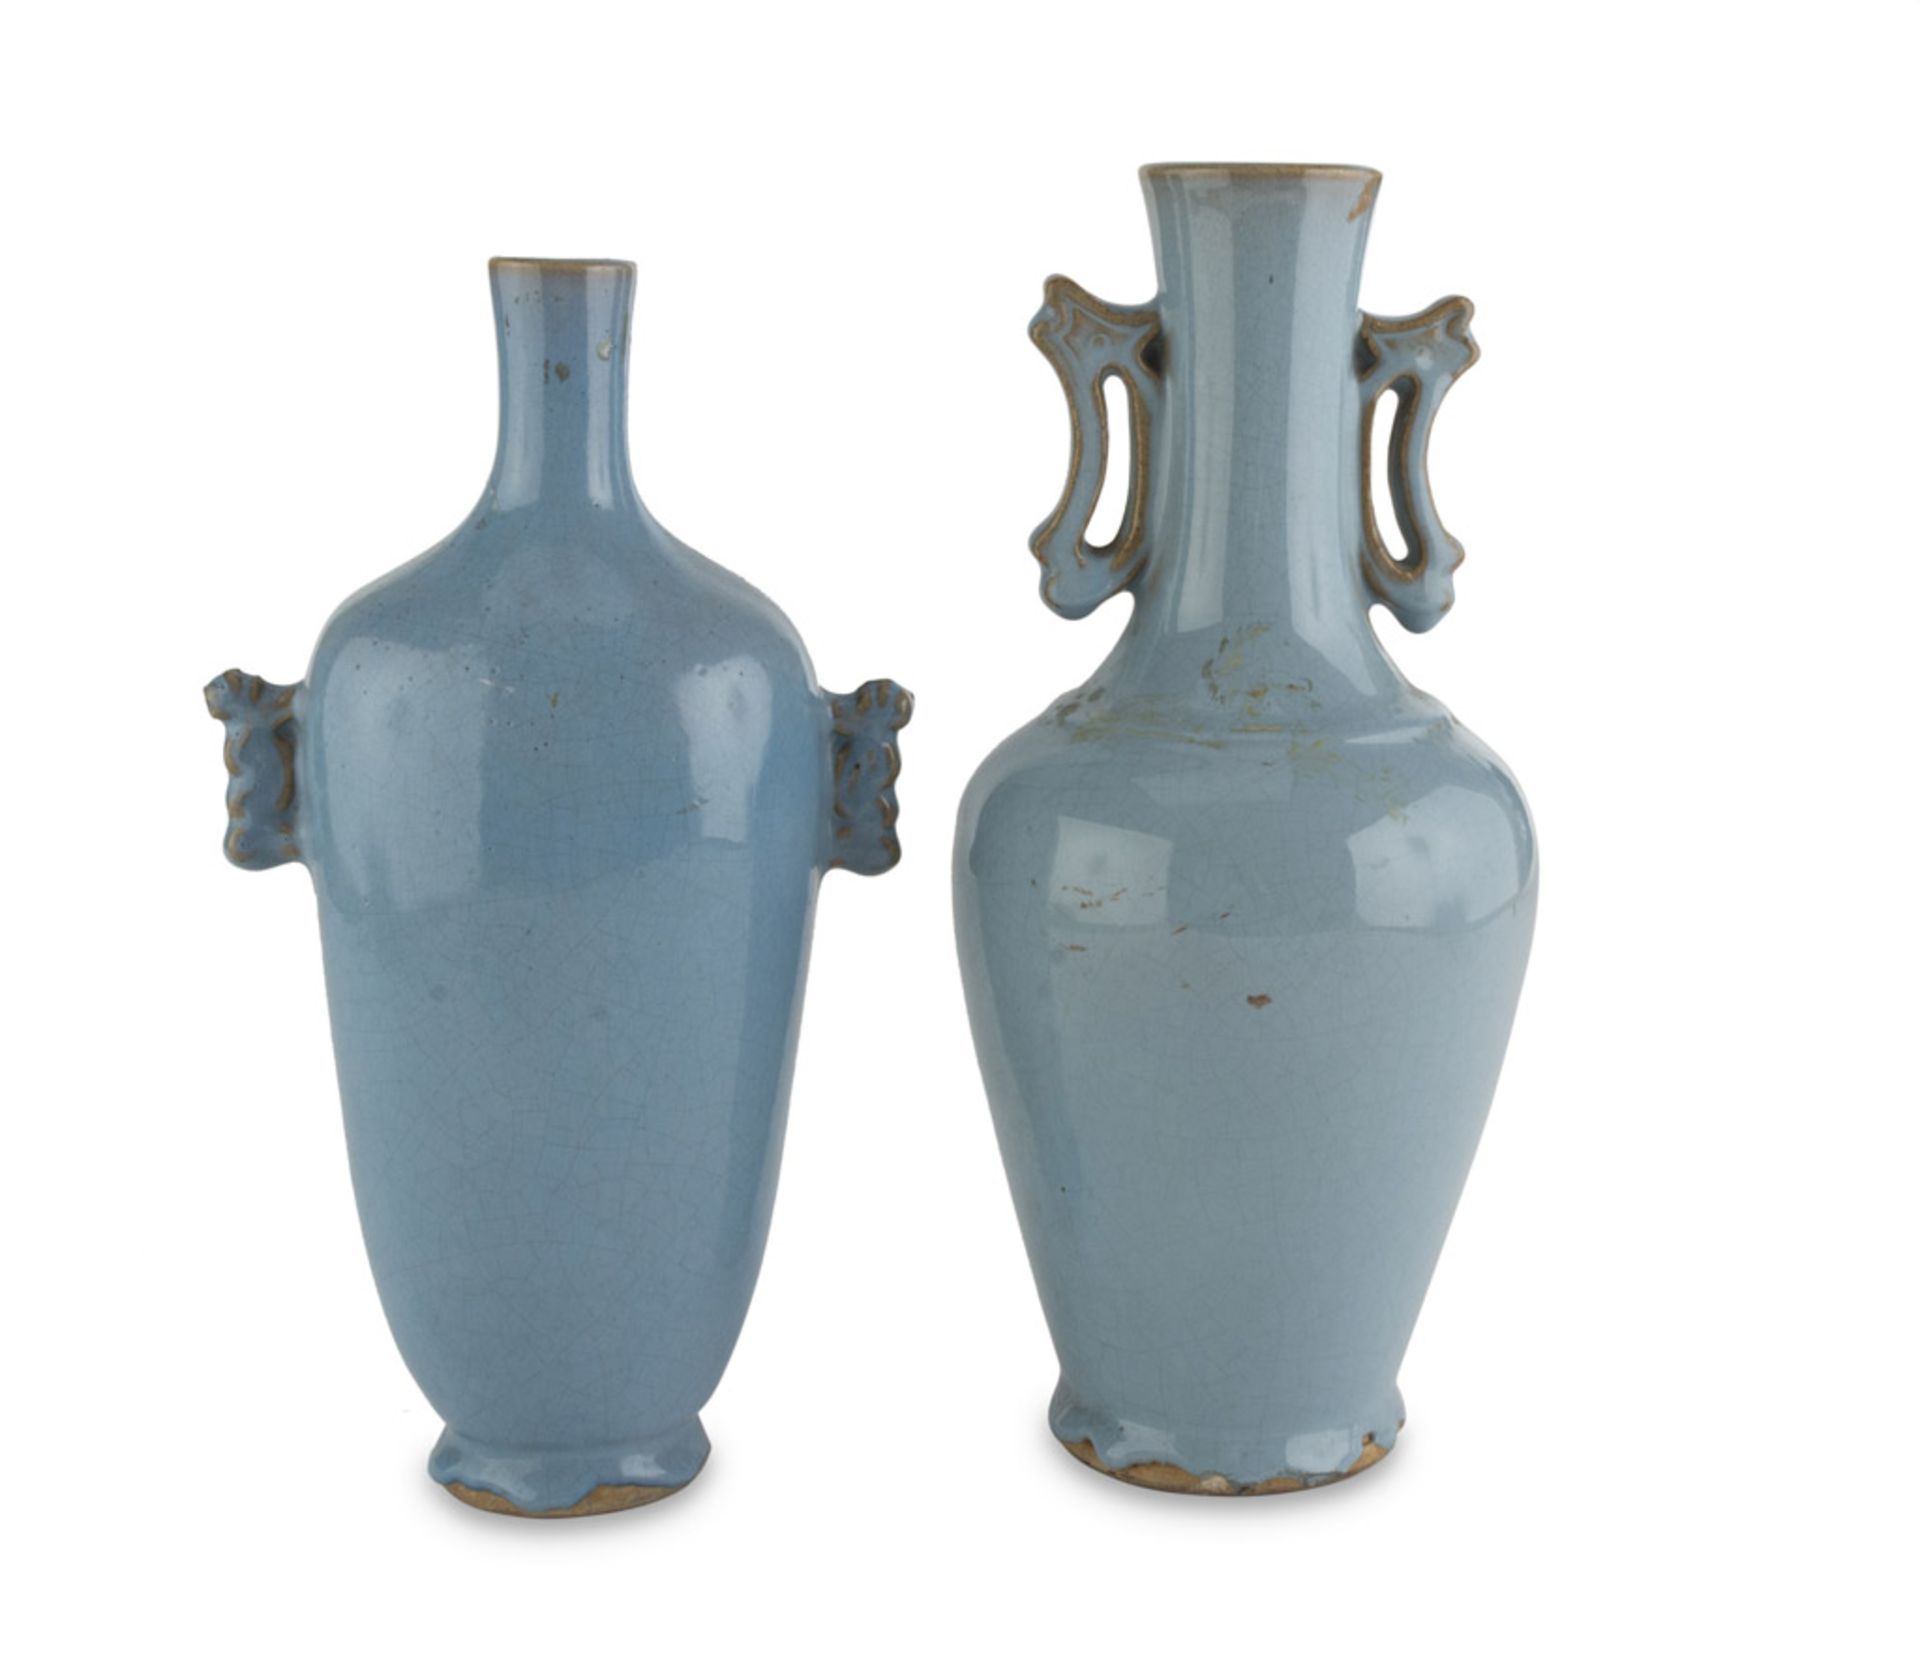 TWO TURQUOISE GLAZED PORCELAIN VASES, CHINA 20TH CENTURY bodies decorated with geometric handles.